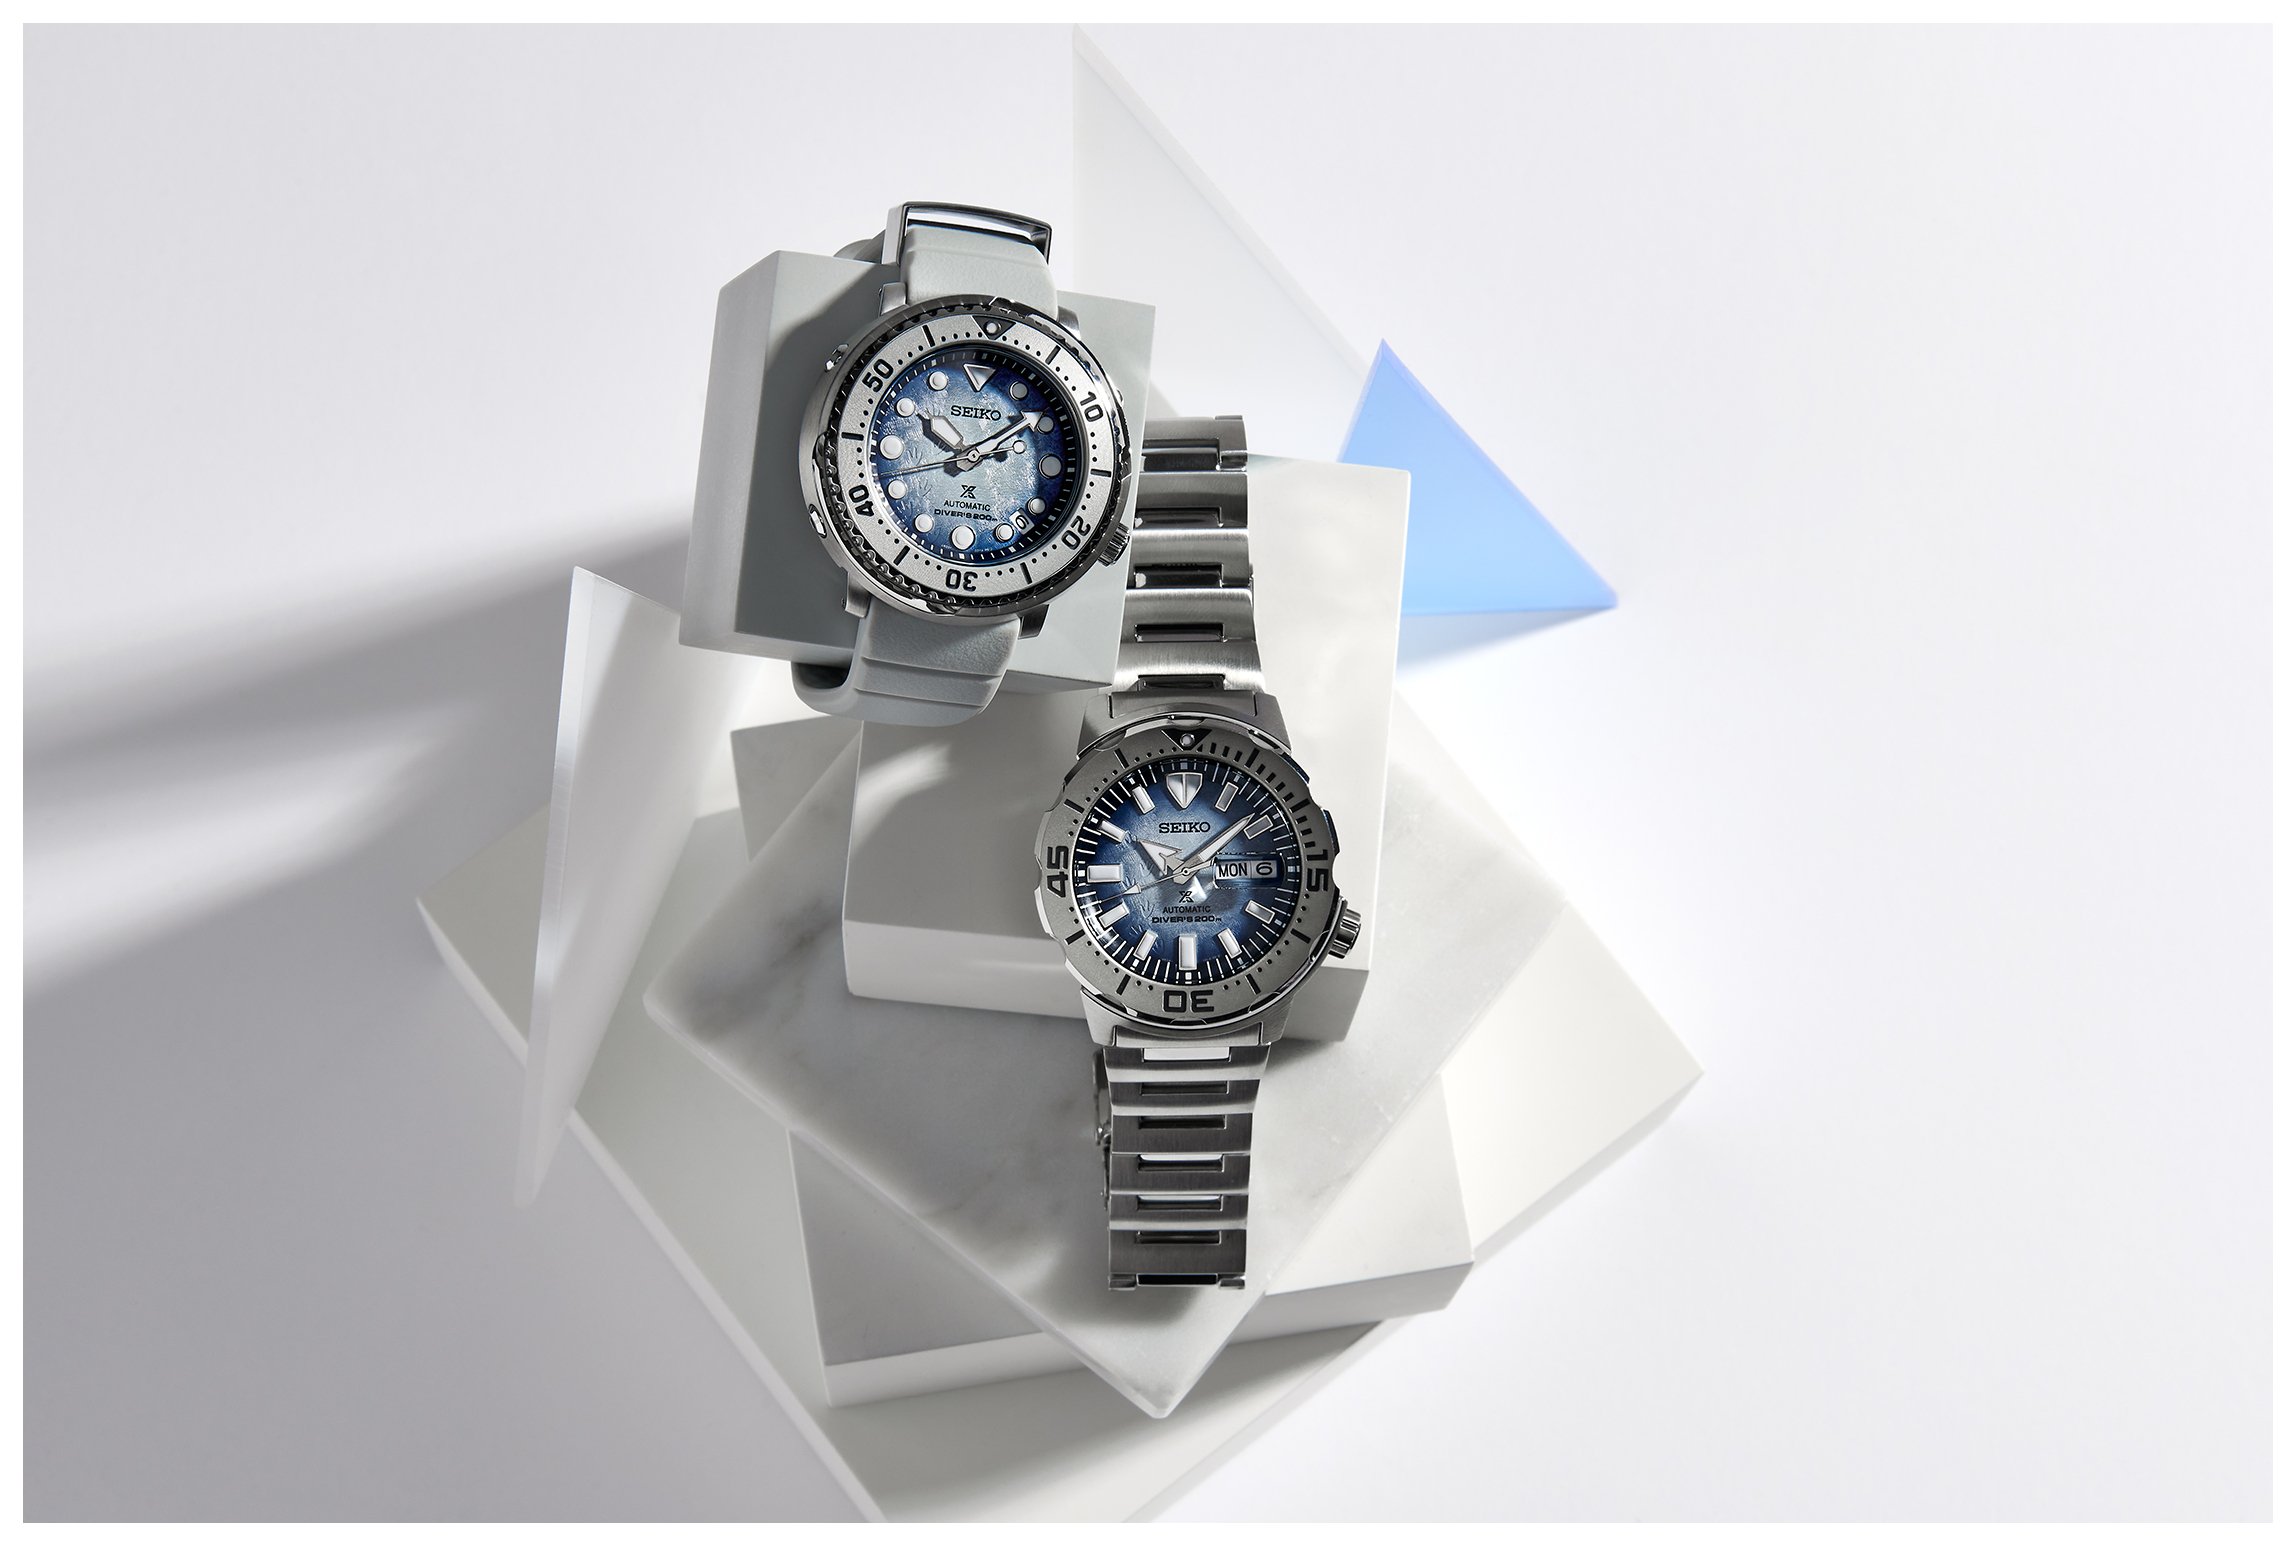 The Seiko Prospex Antarctica Watches - First Class Watches Blog